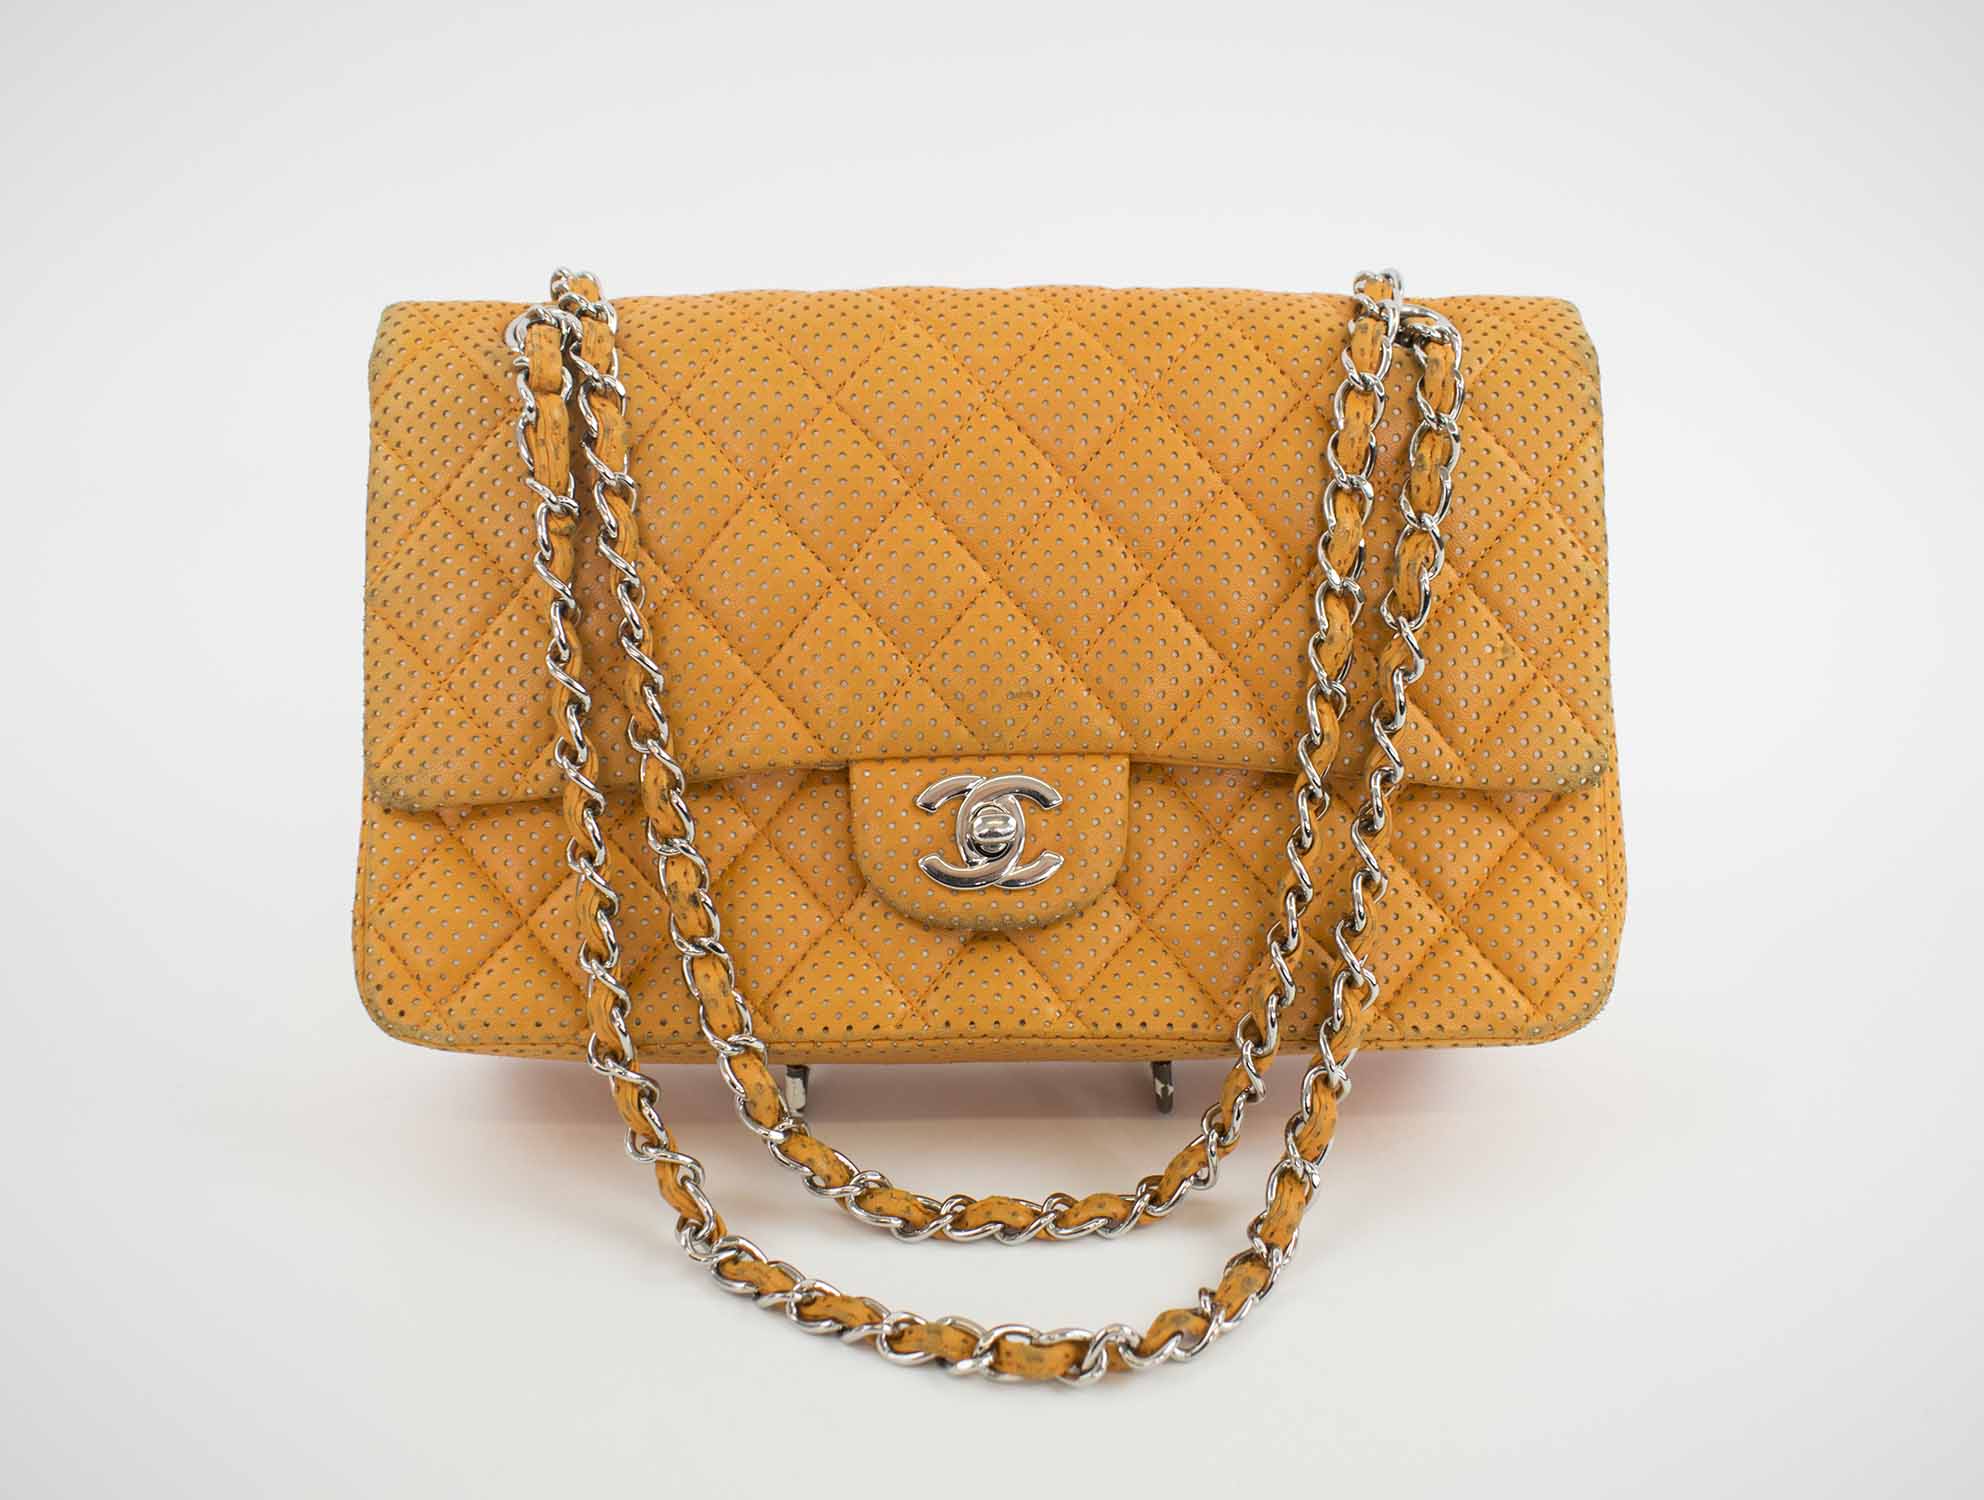 CHANEL LAMBSKIN PERFORATED DOUBLE FLAP BAG, with iconic diamond orange  quilted perforated leather, with silver tone hardware and CC turn lock, orange  leather lining, 2006-2008, authenticity card, 26cm x 15cm H.